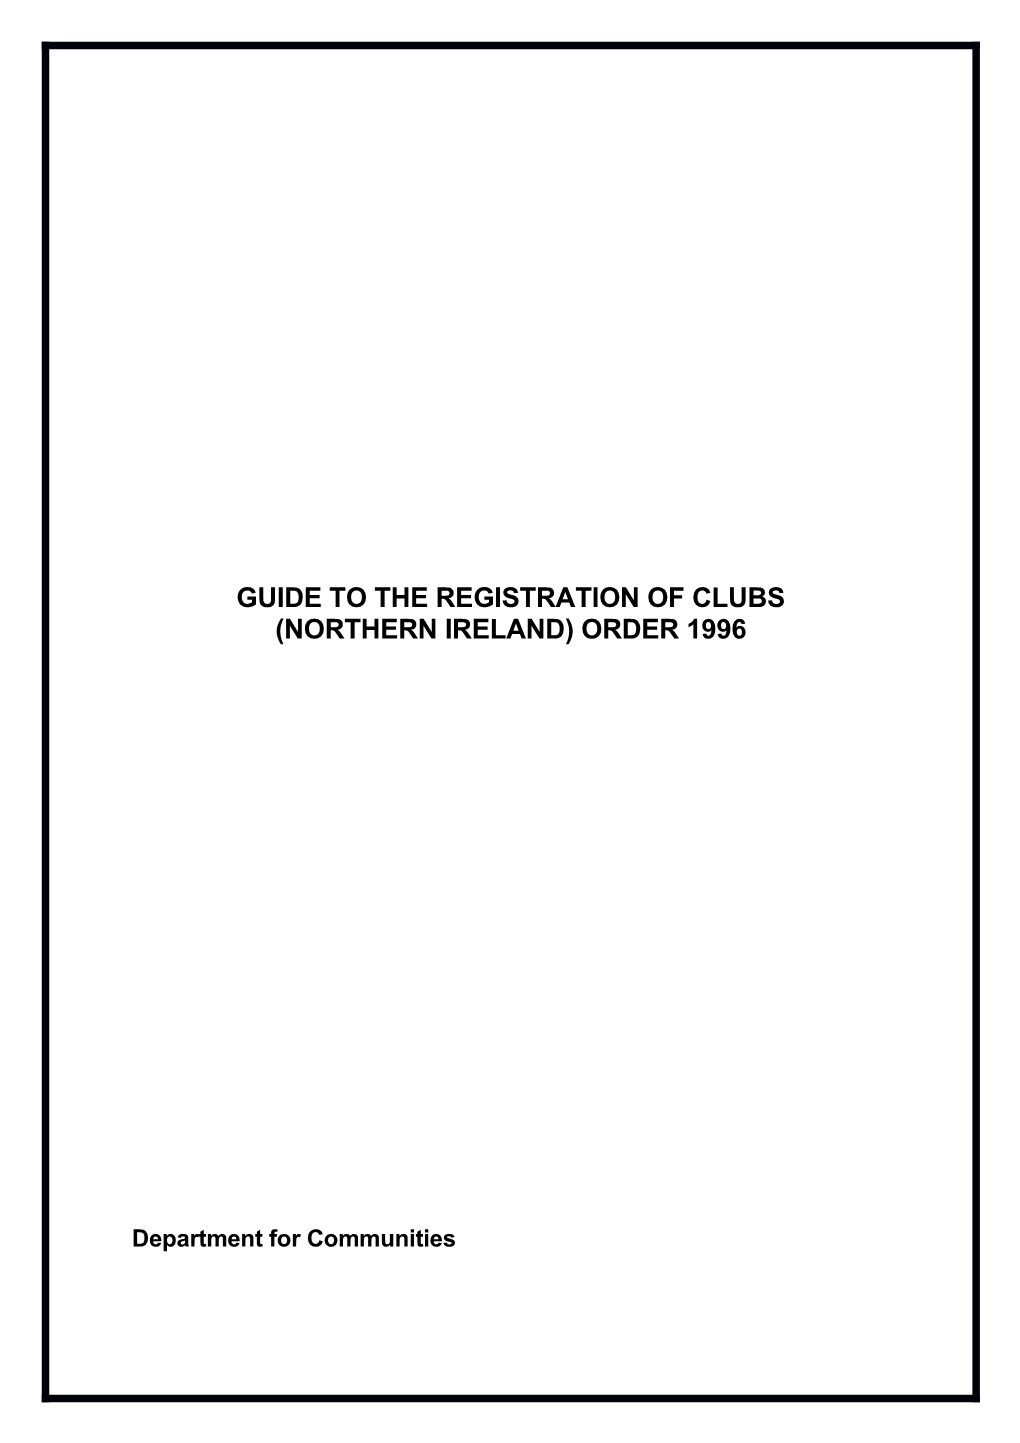 Guide to the Registration of Clubs